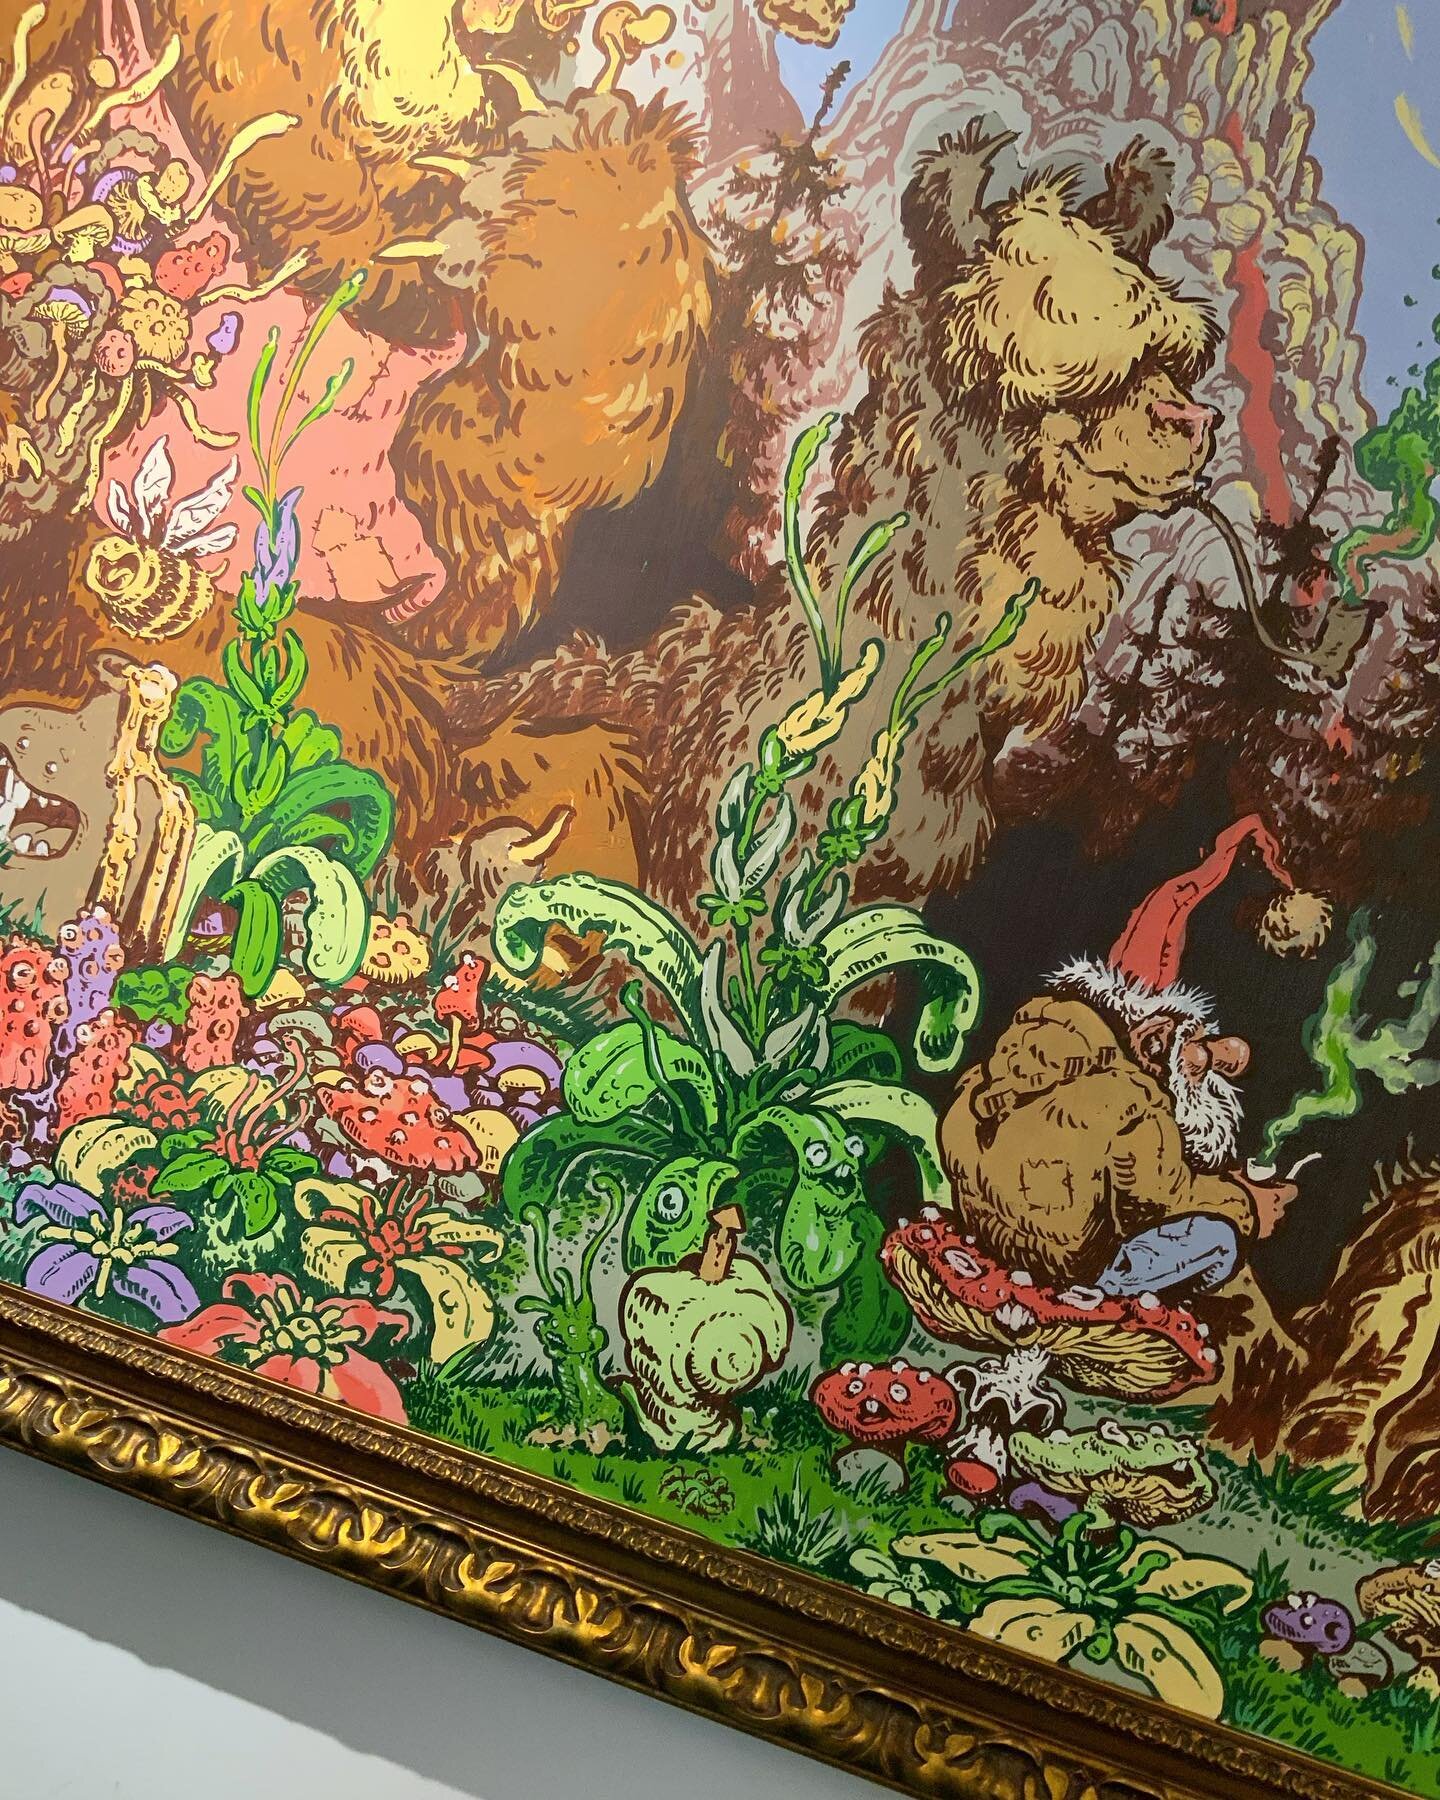 🌳✨(WIP) THE FOREST PALS✨🌳
One more day of painting and this piece is finished. It&rsquo;s been quite the journey painting this 500 x 165cm painting for the @cannabismuseumamsterdam but well worth it. Here you see two small sections of the work. Ful